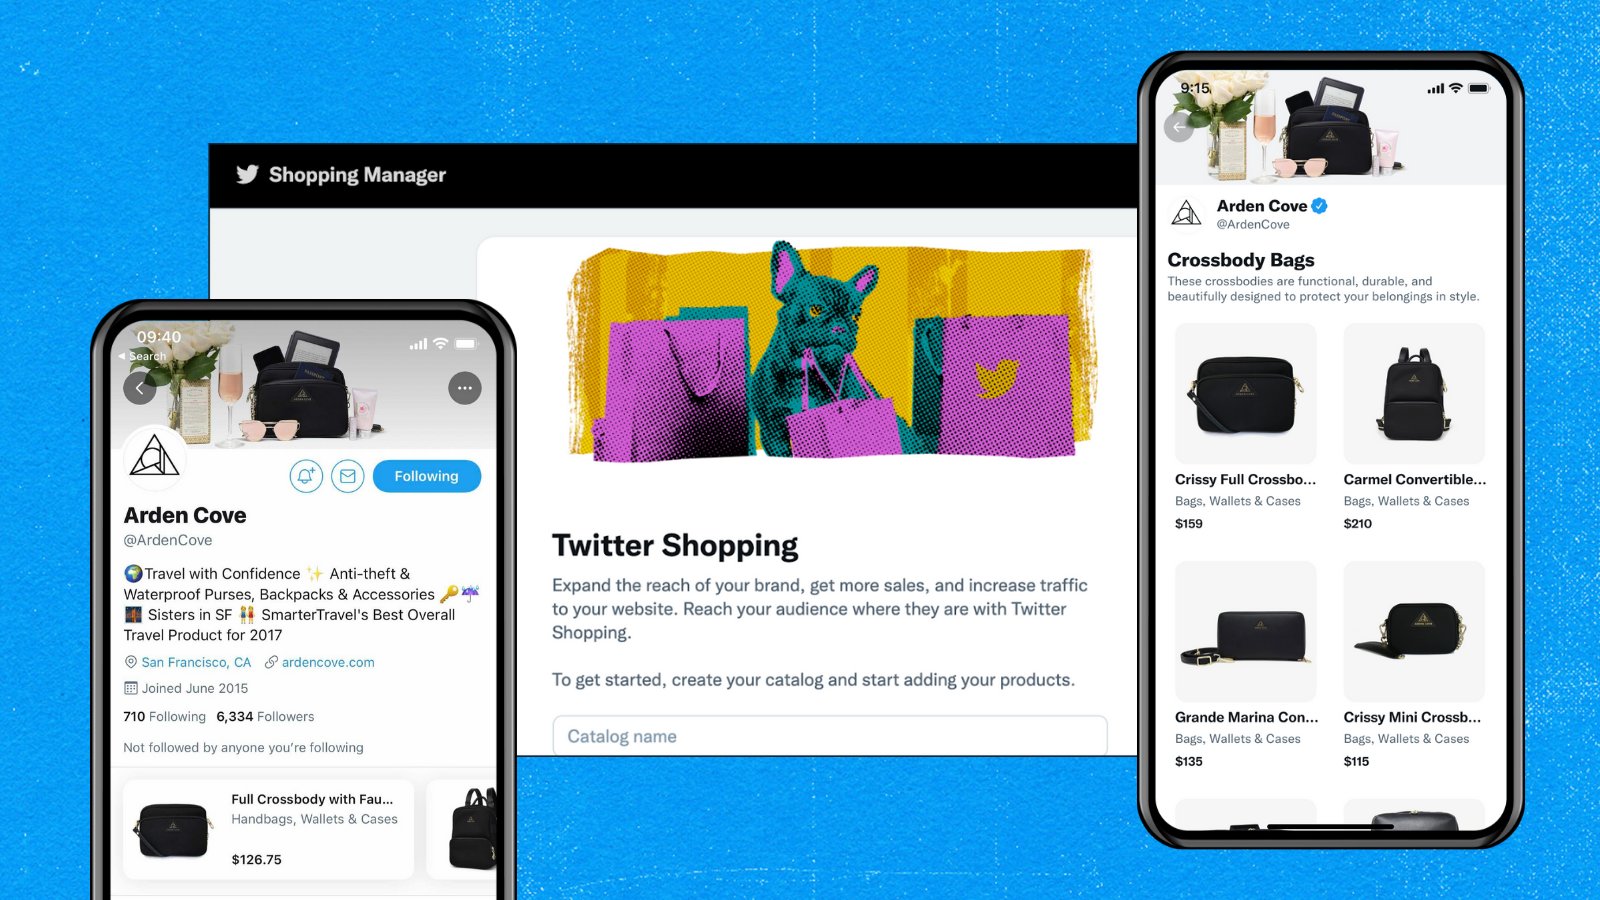 Image of Twitter Shopping features